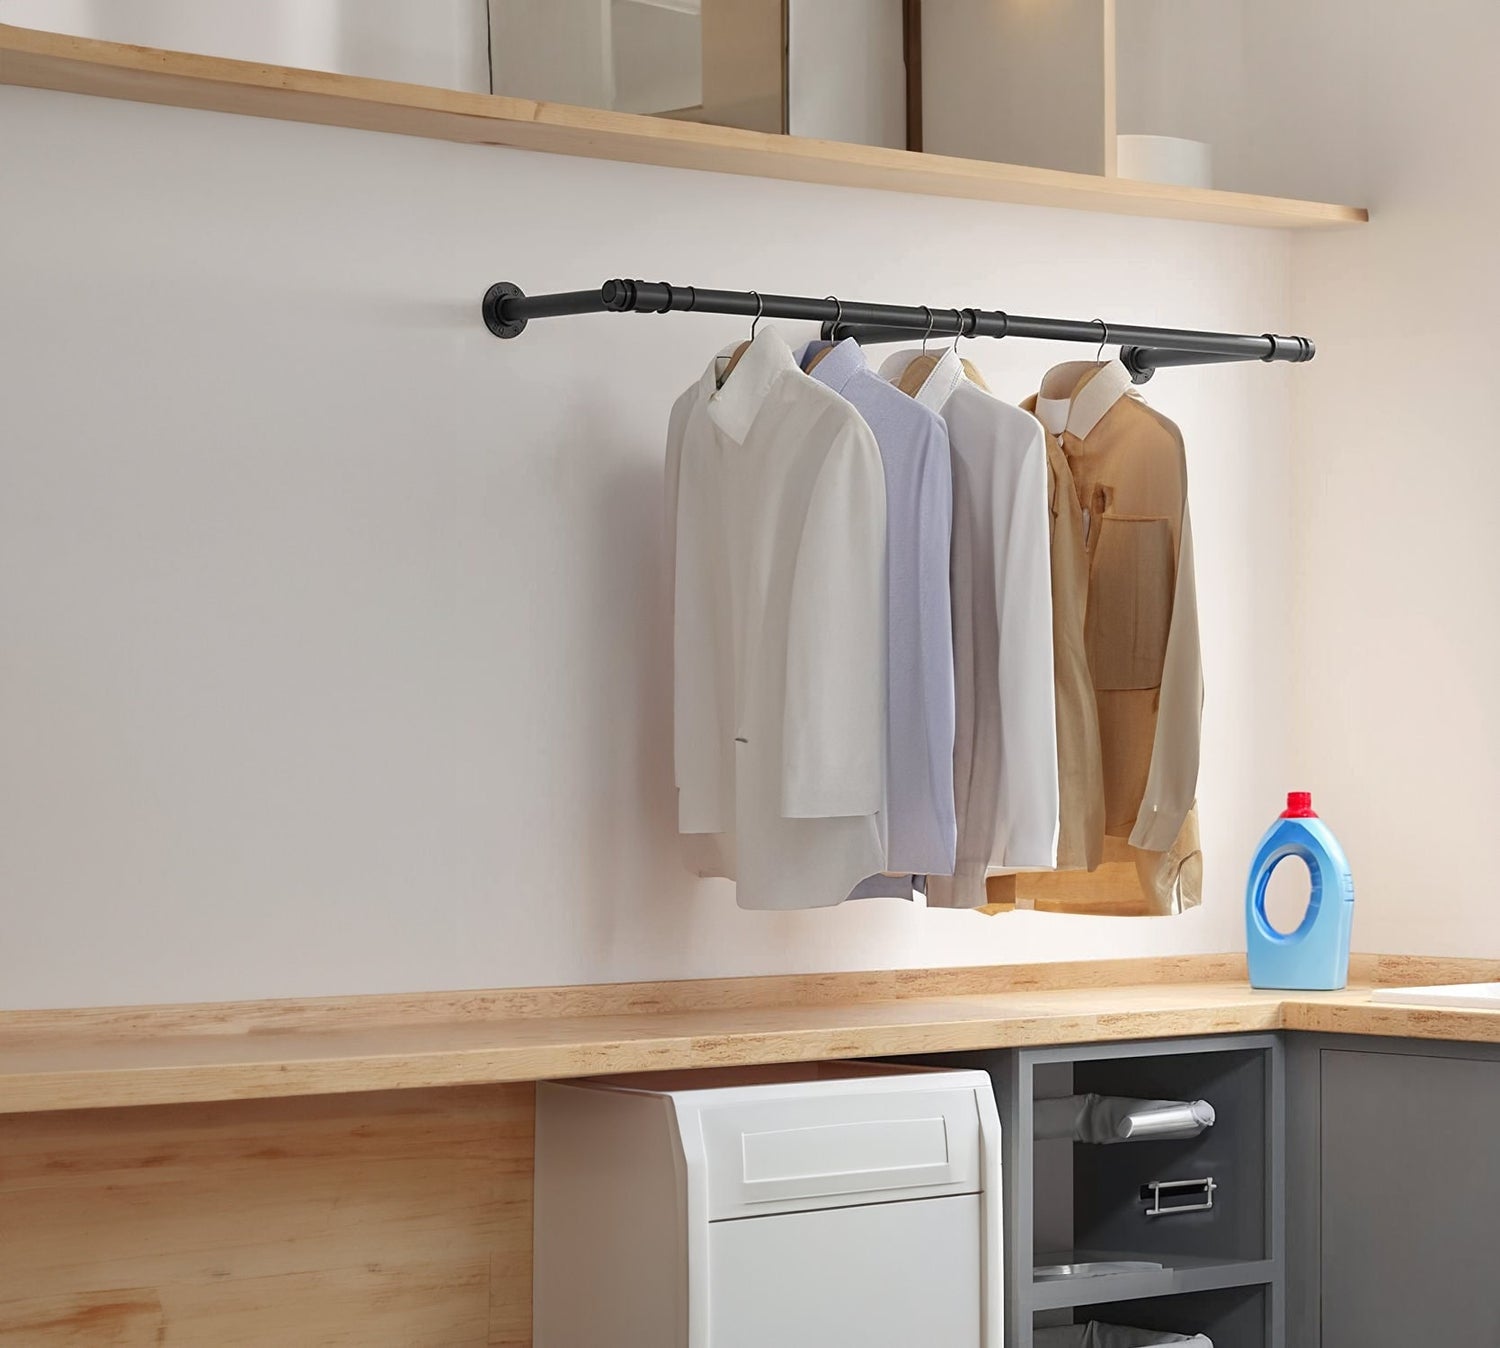 Retro wall-mounted hanging clothing rack, showcasing its design and capacity to hold many pieces of clothing.